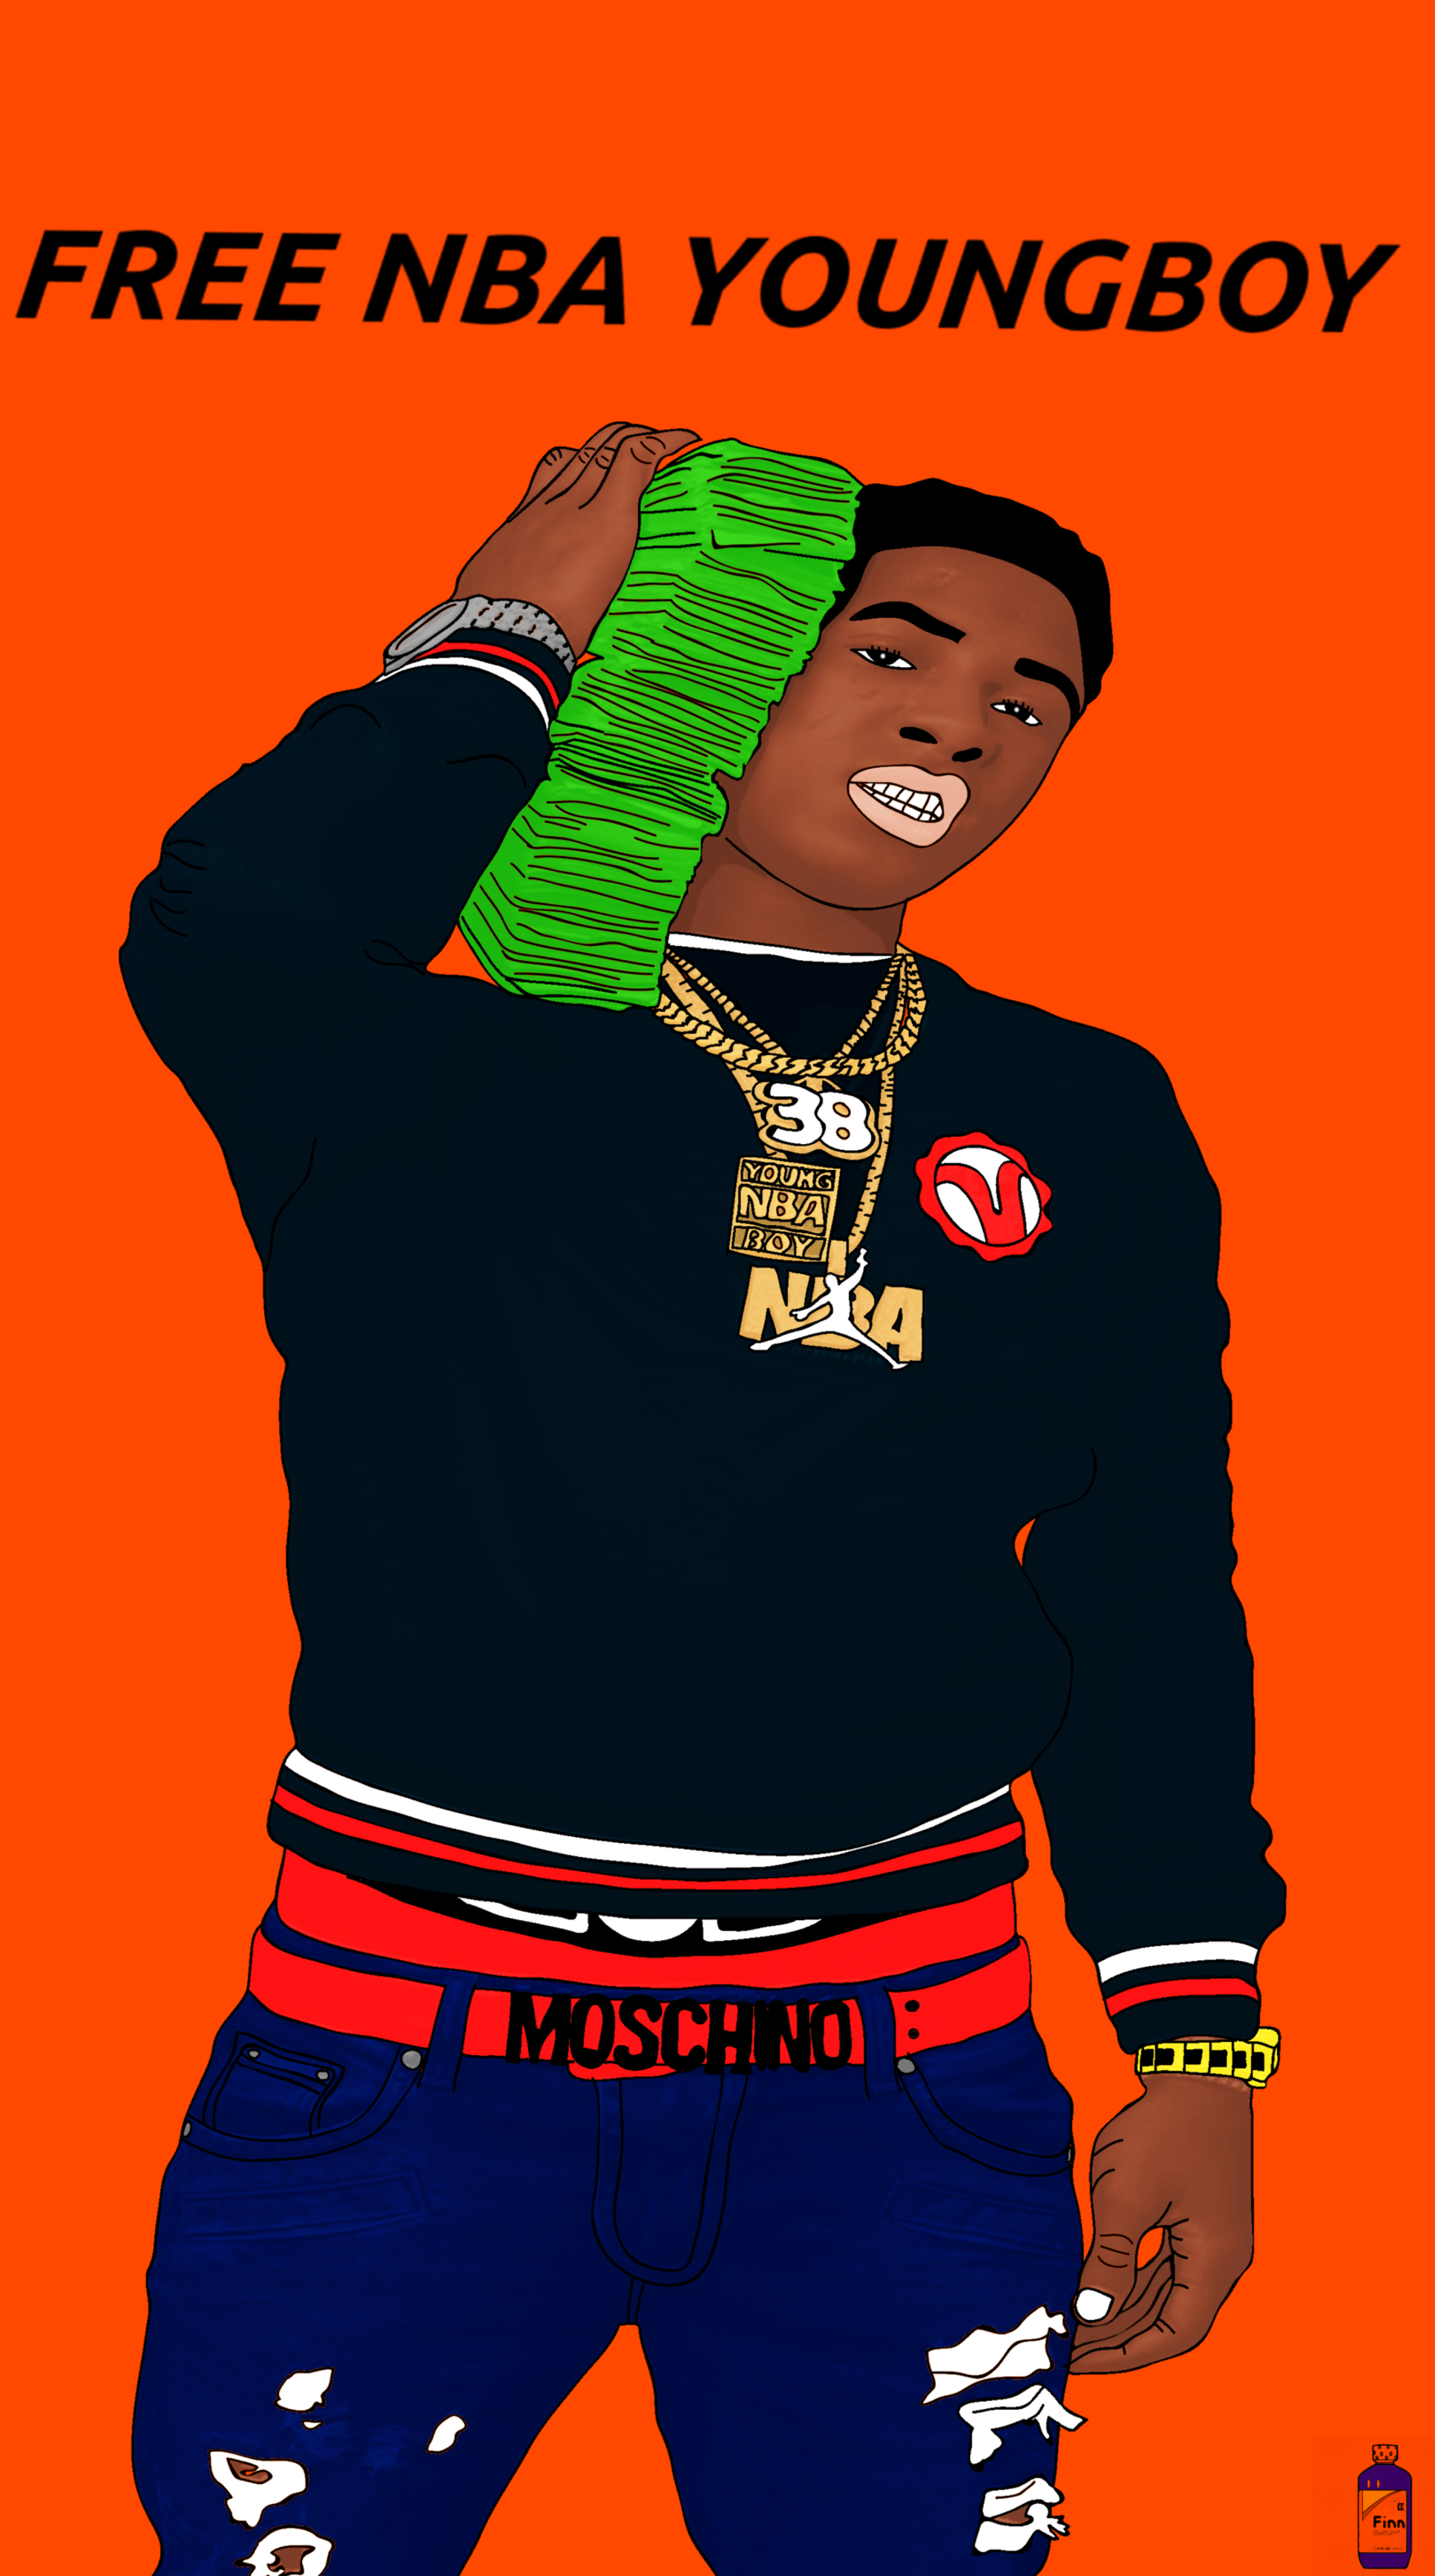 NBA YoungBoy 2019 Wallpapers - Wallpaper Cave